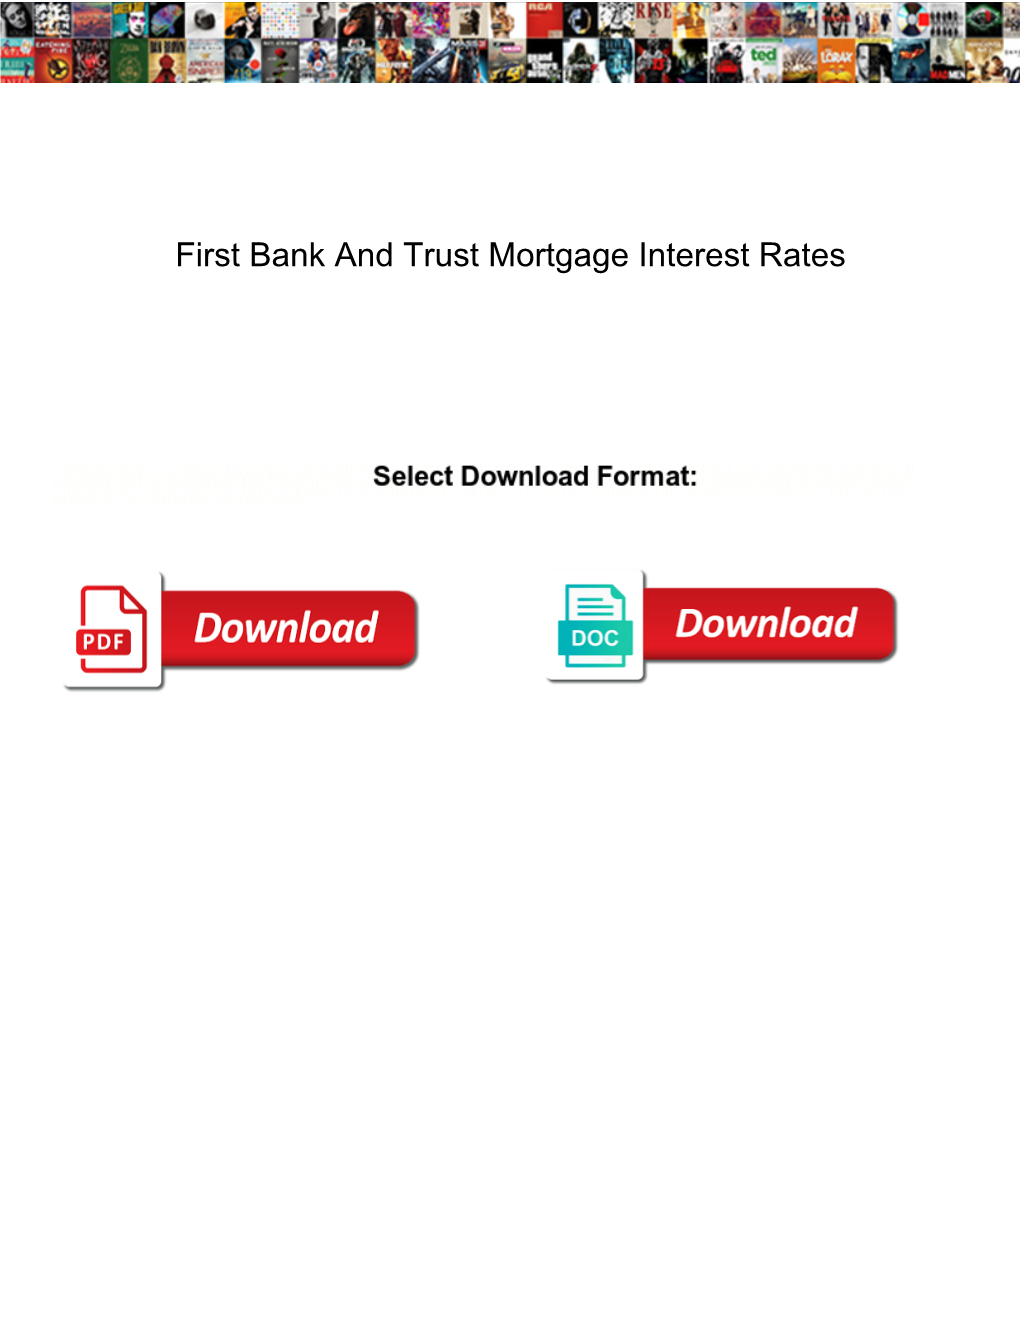 First Bank and Trust Mortgage Interest Rates